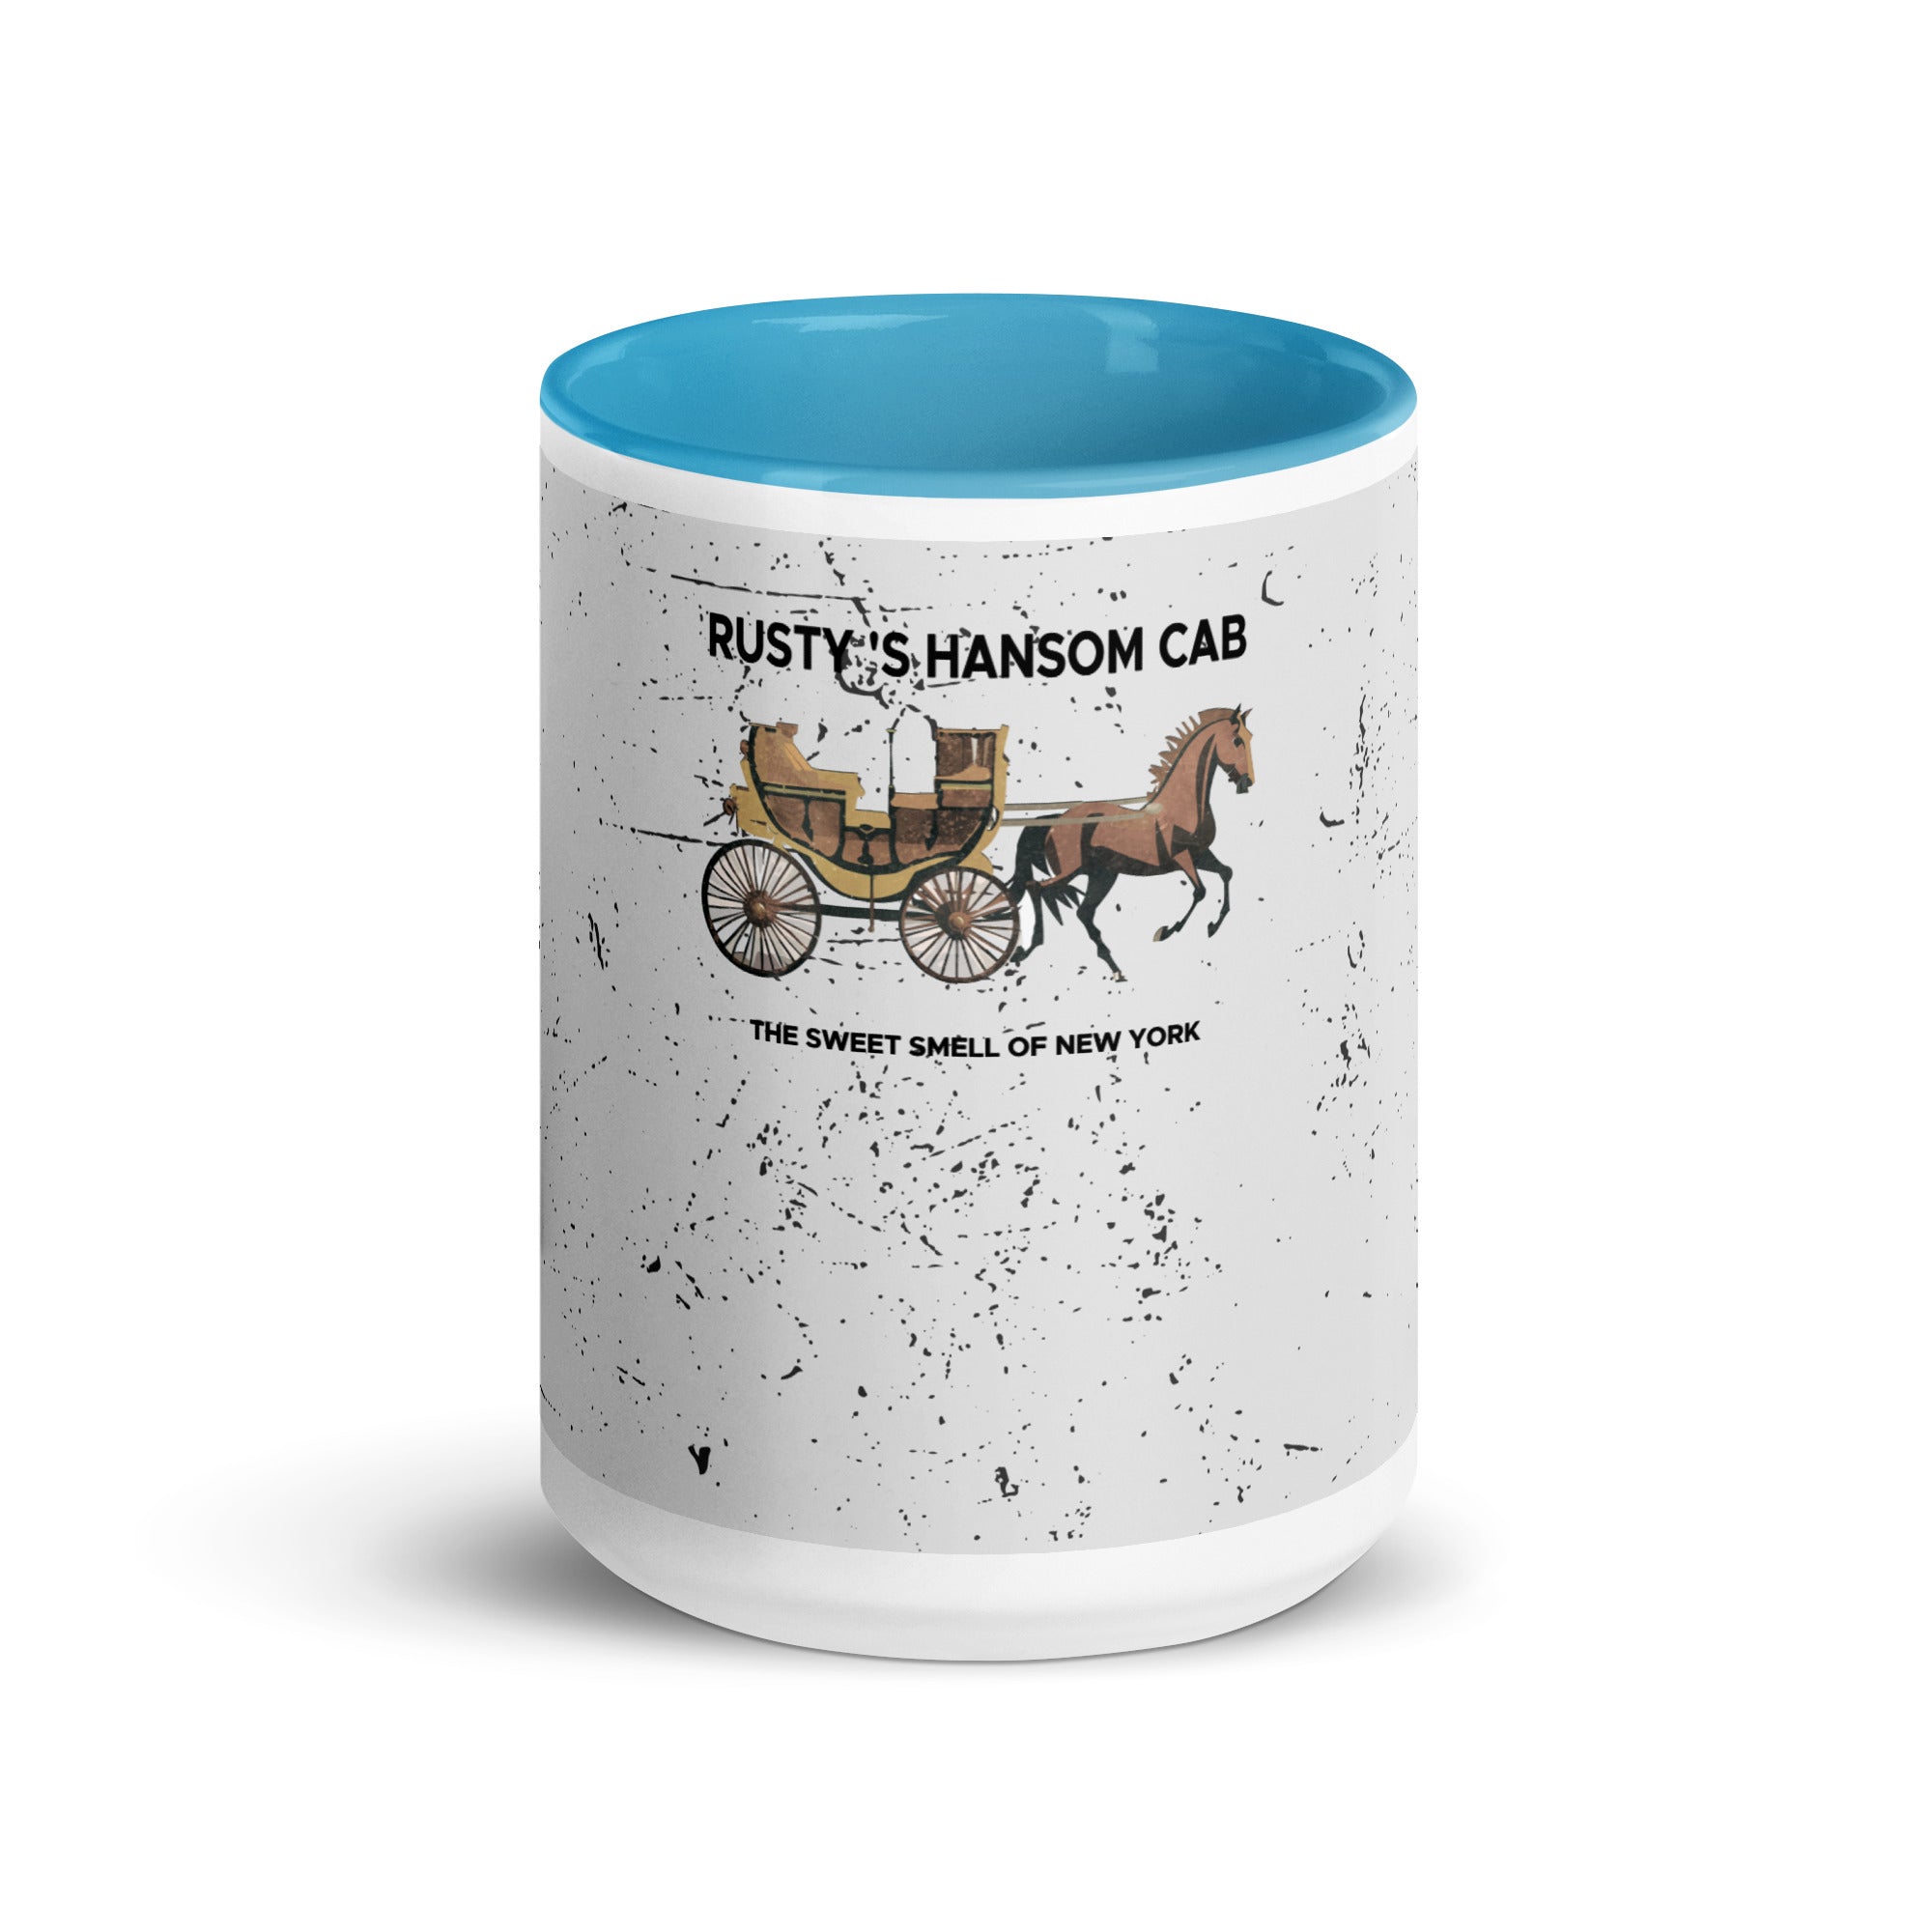 Rusty's Hansom Cab with Color Inside